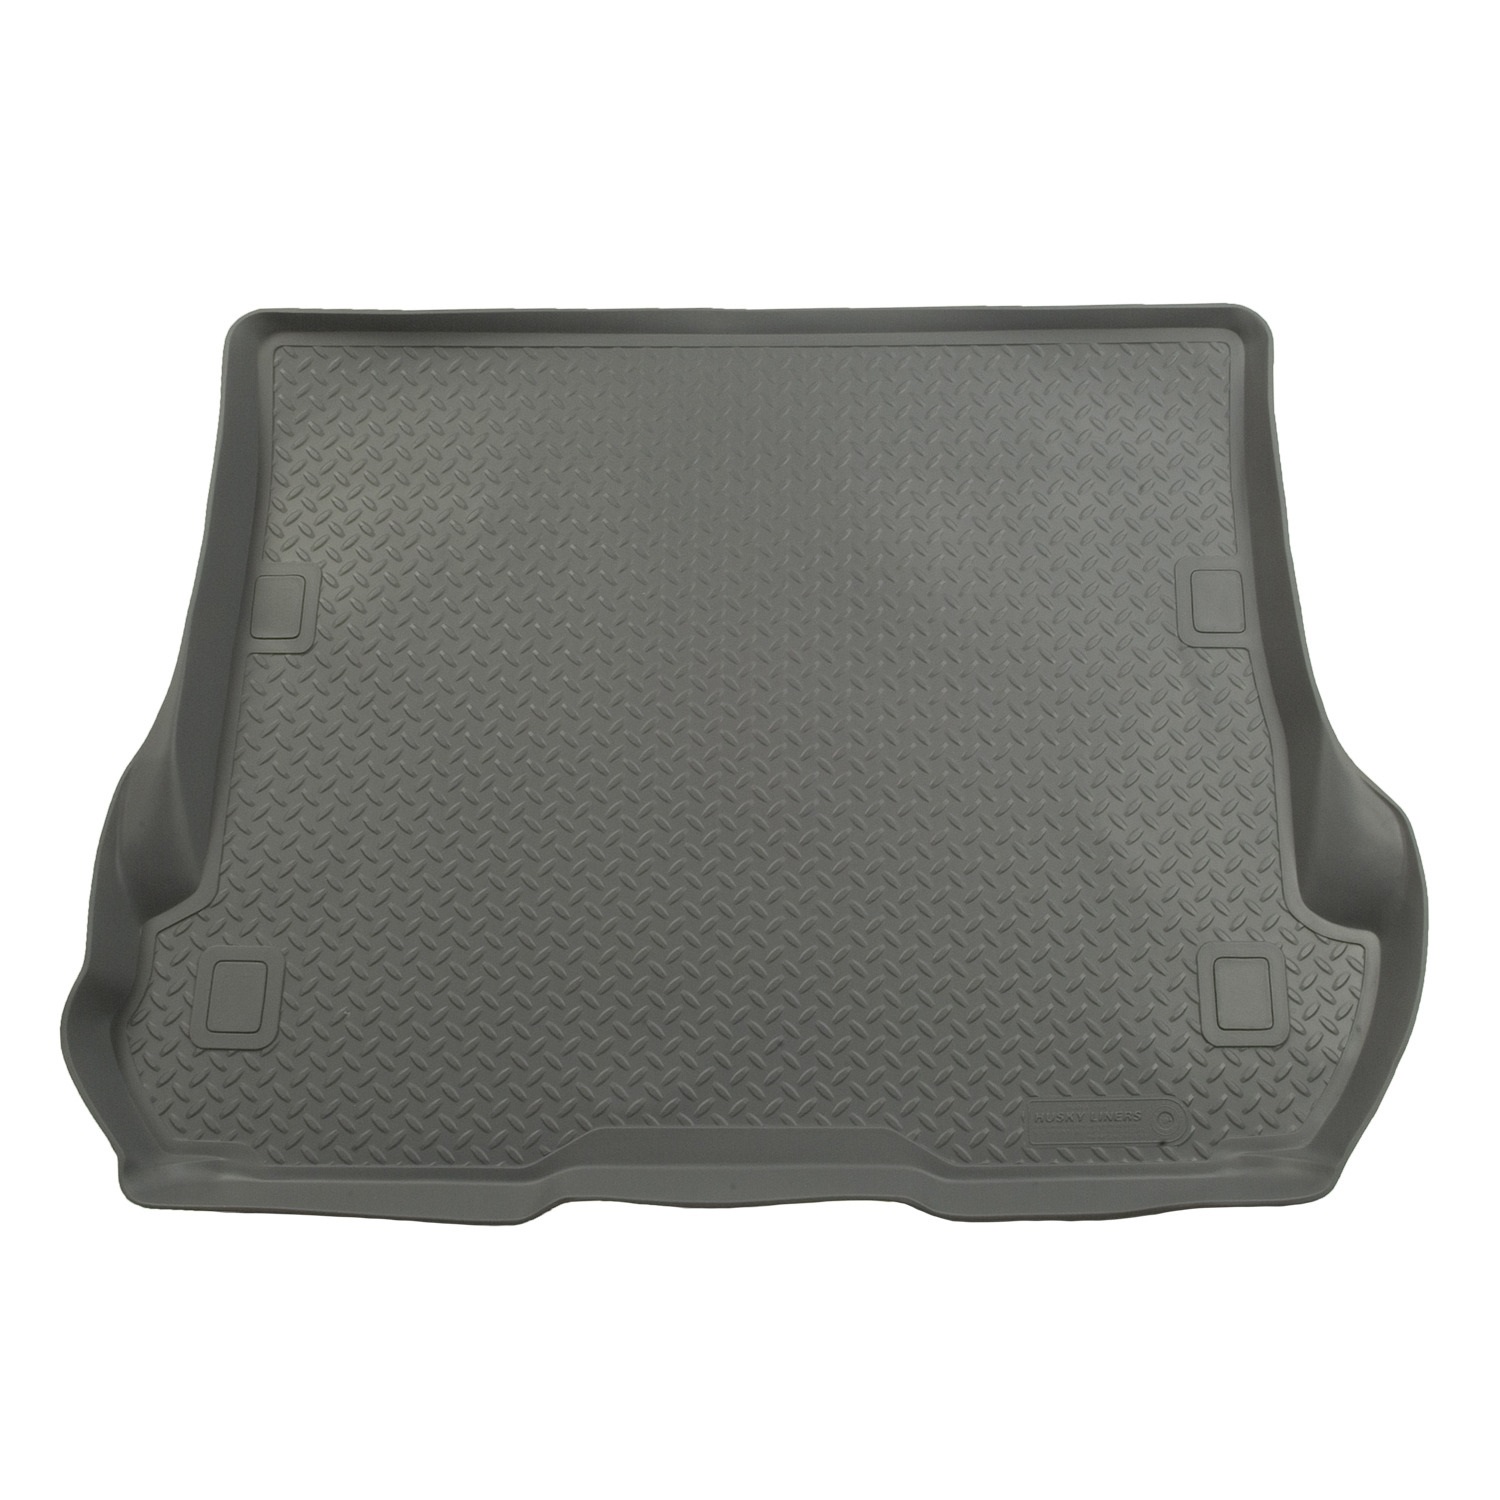 Husky Liners Husky Liners 26512 Classic Style; Cargo Liner Fits 00-04 Xterra